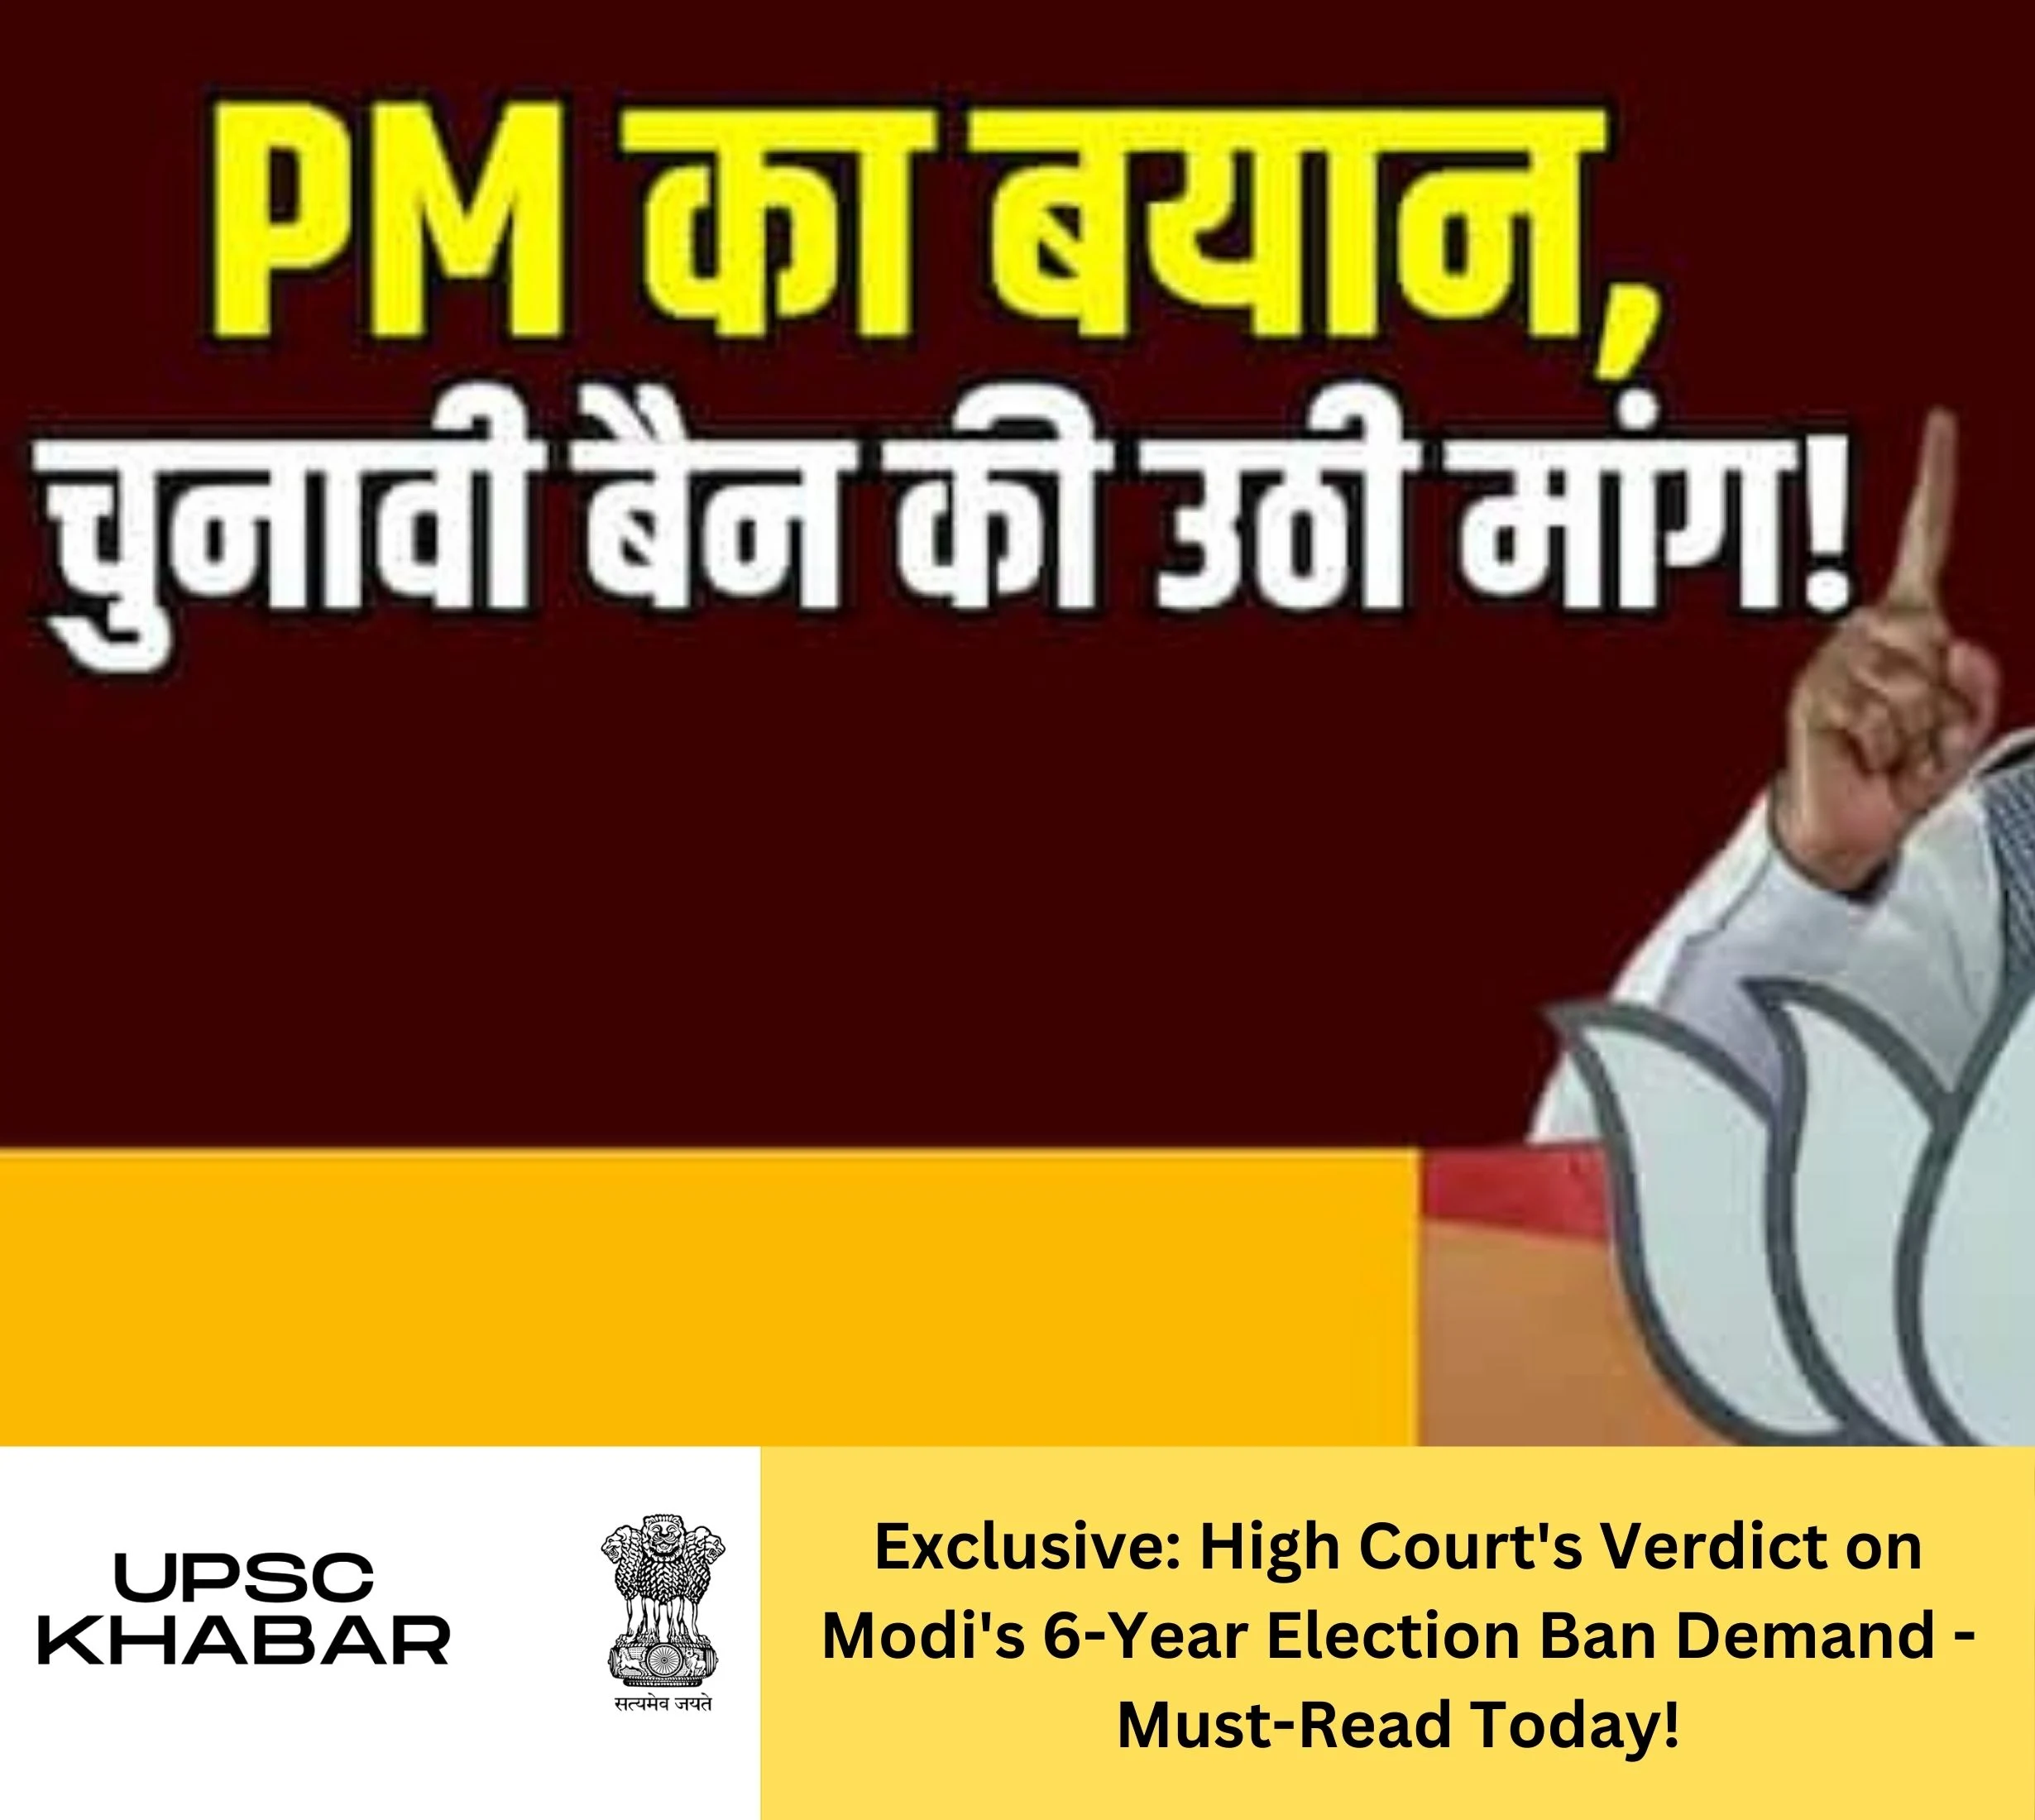 Exclusive: High Court's Verdict on Modi's 6-Year Election Ban Demand - Must-Read Today!